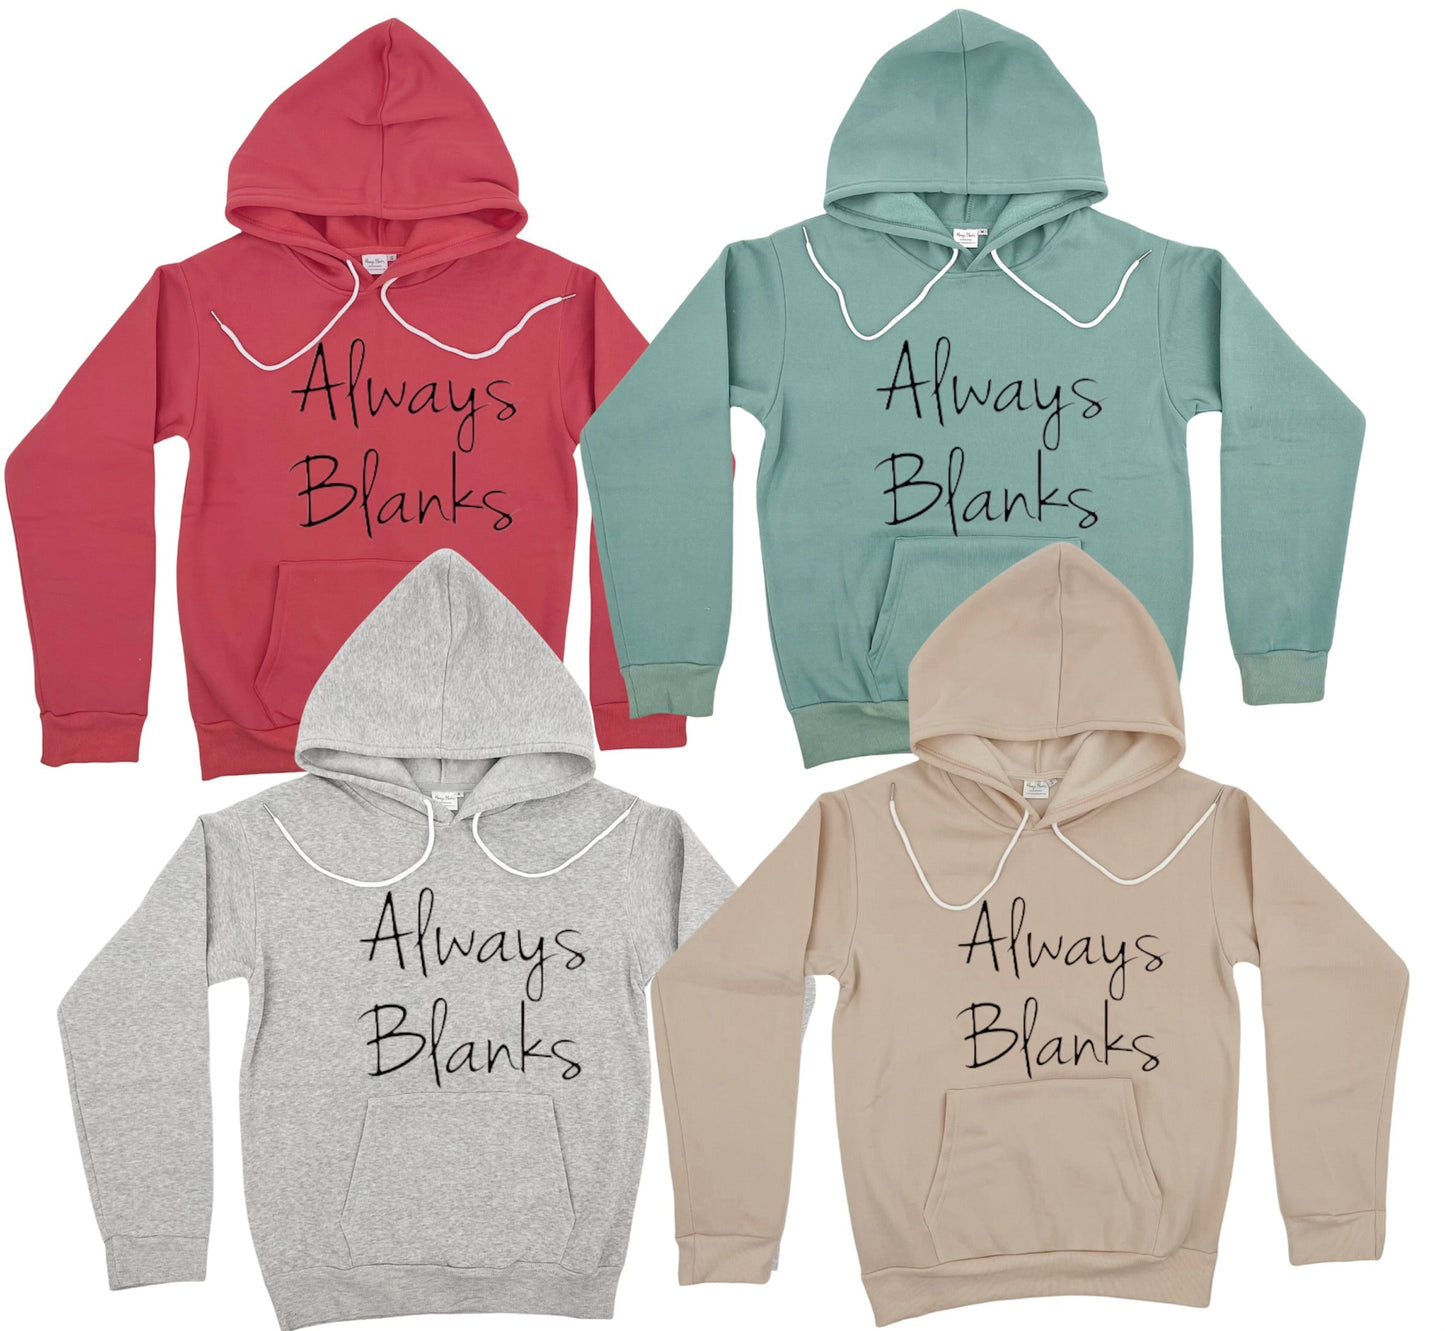 ADULT - COLORED Sublimation FLEECE HOODIE